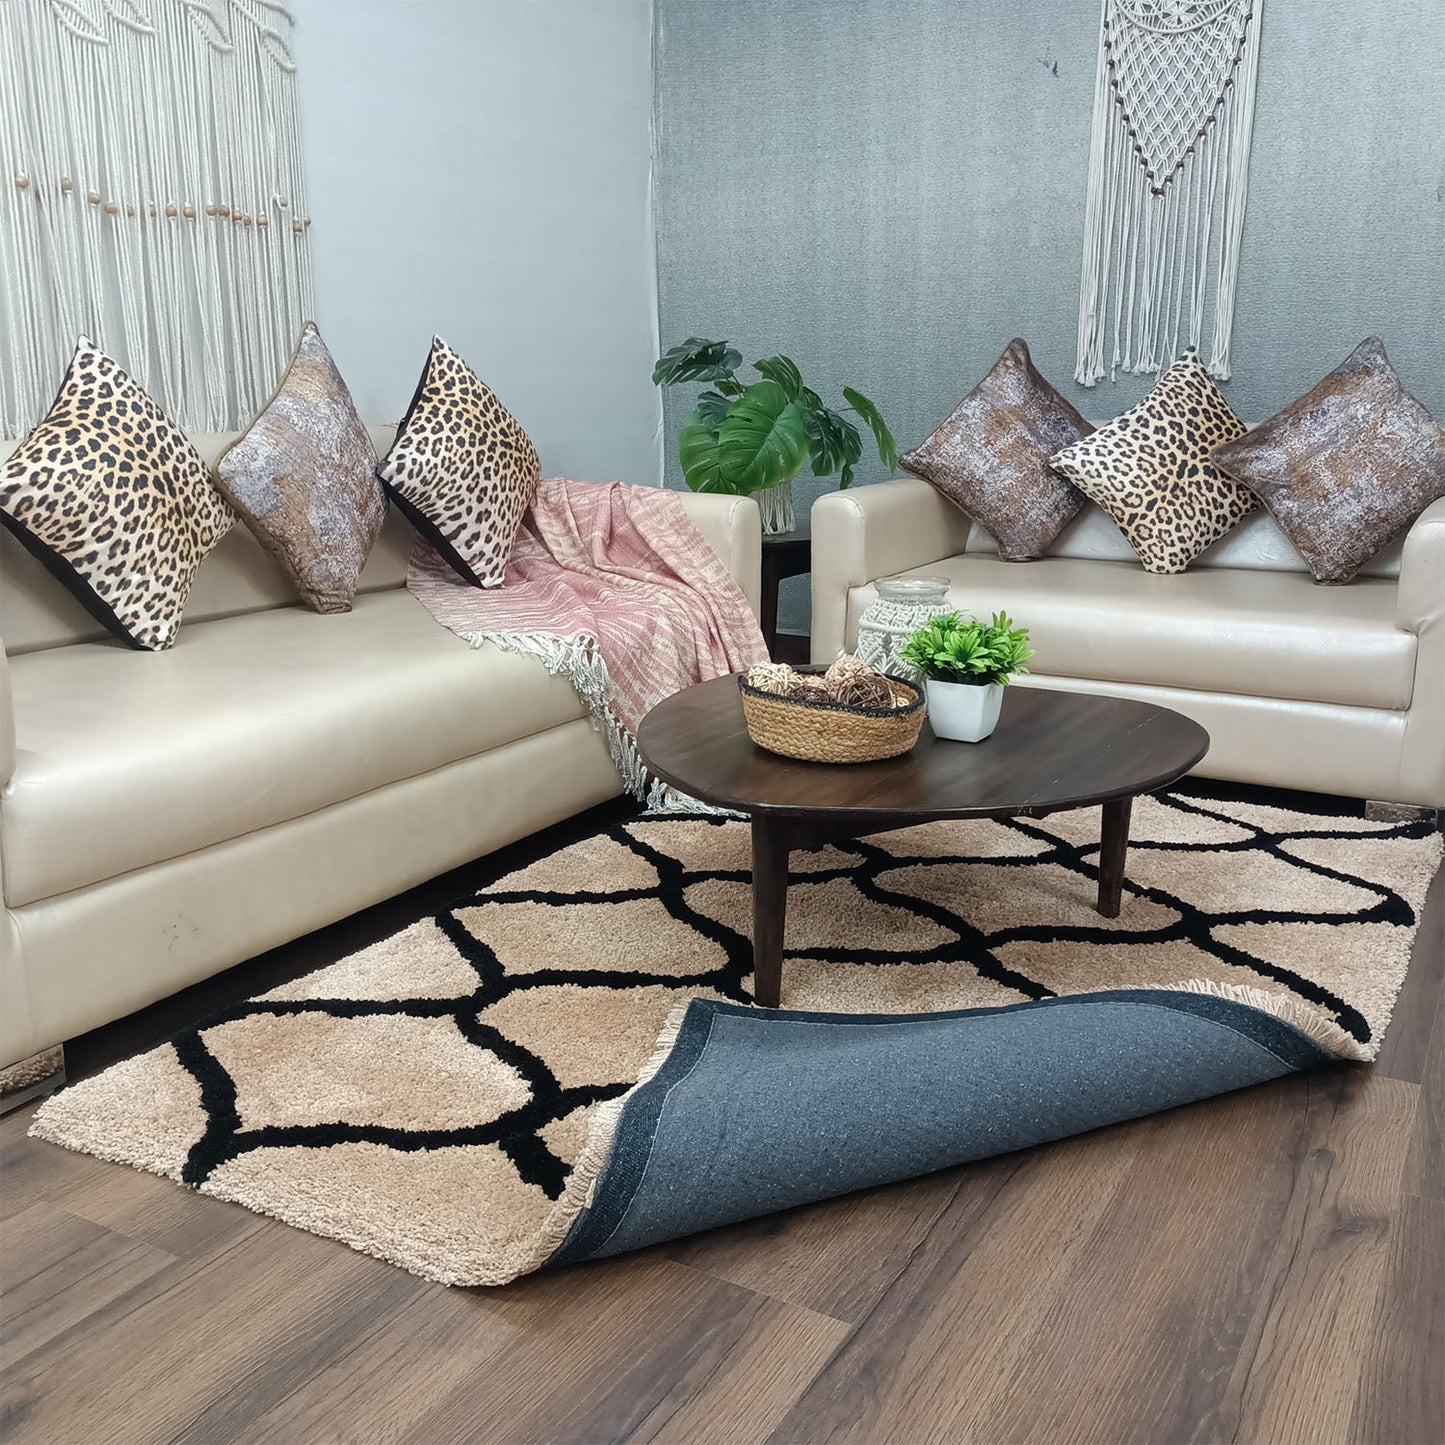 Avioni Home Atlas Collection - Moroccan Style Microfiber Carpet In Beige and Brown | Soft, Non-Slip, Easy to Clean